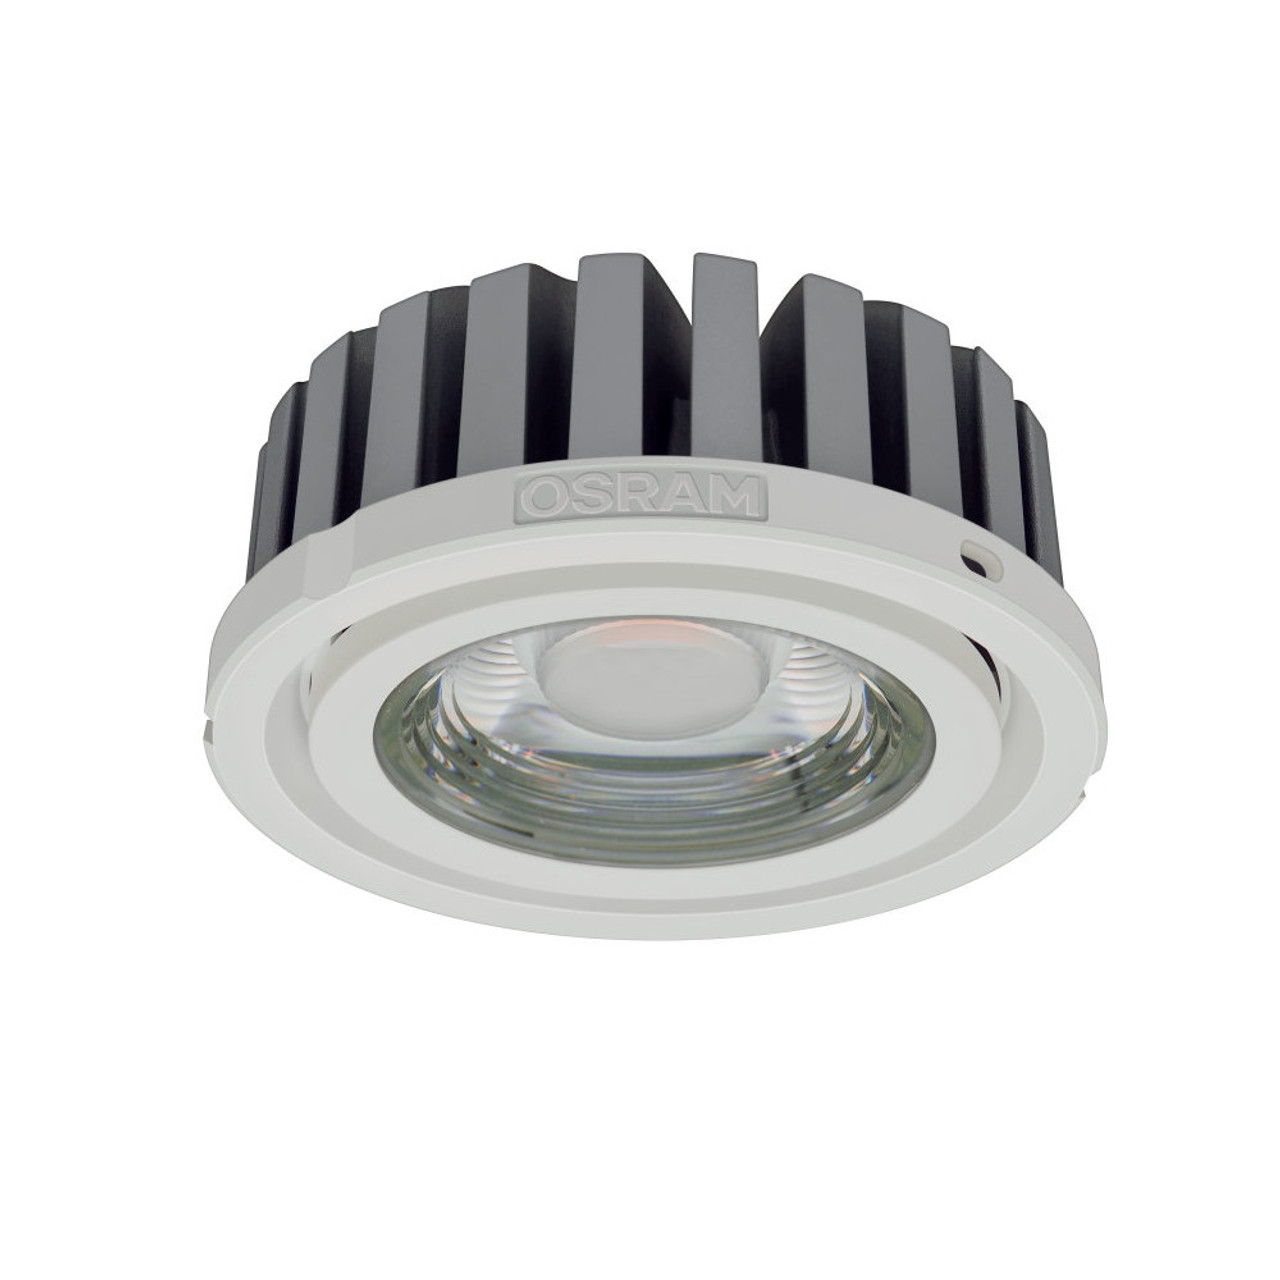 LED 1050mA Constant Current 36.7W Dimmable 930 3000K 3350lm 40 degrees COB